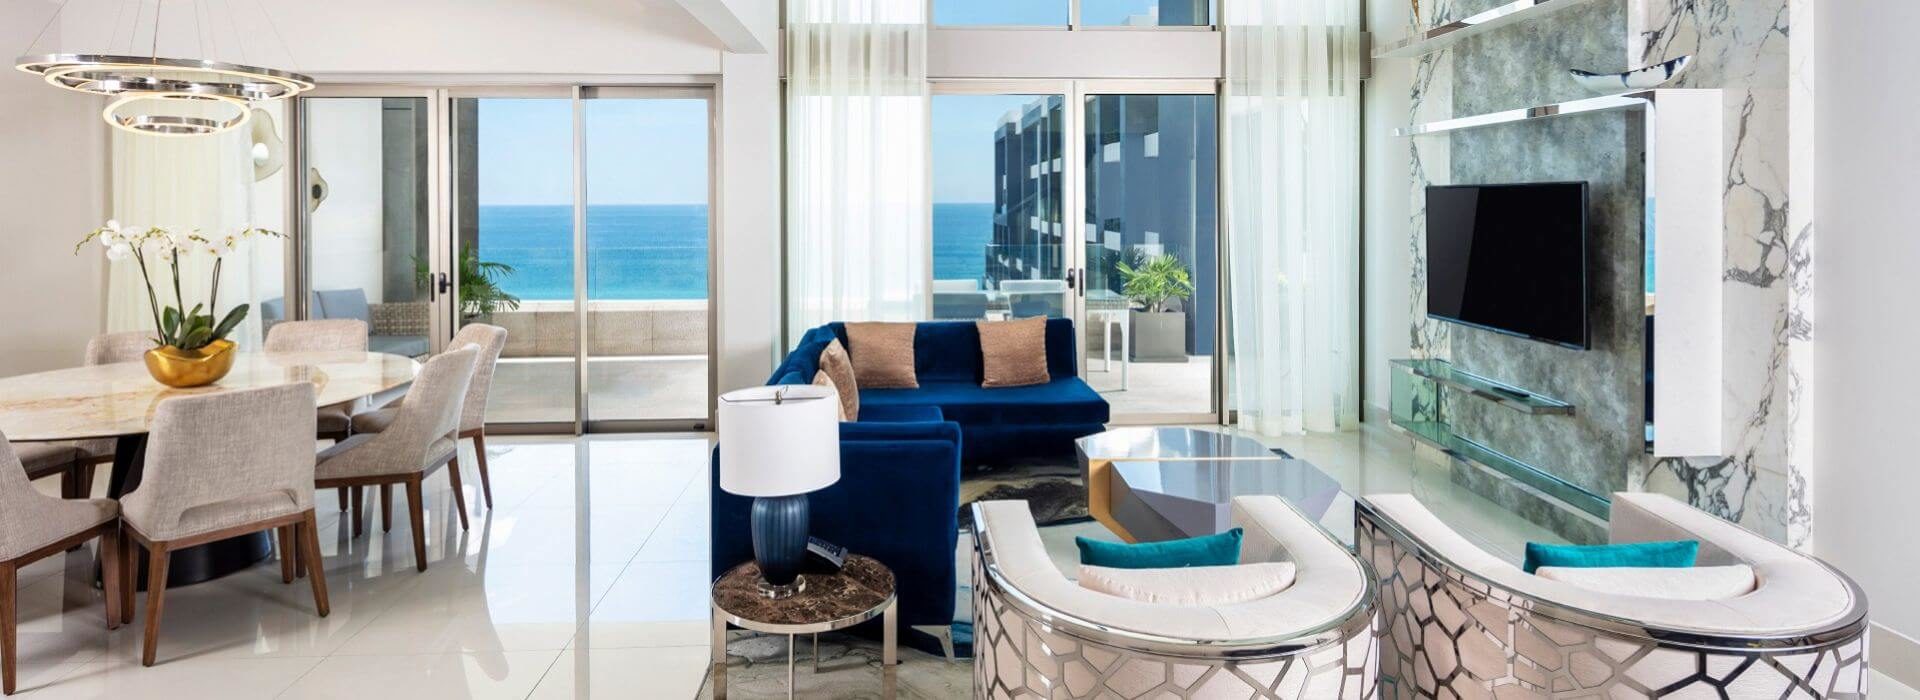 Spacious living and dining area with blue and white furniture, flat screen TV, and sliding doors out to a spacious terrace with ocean views.